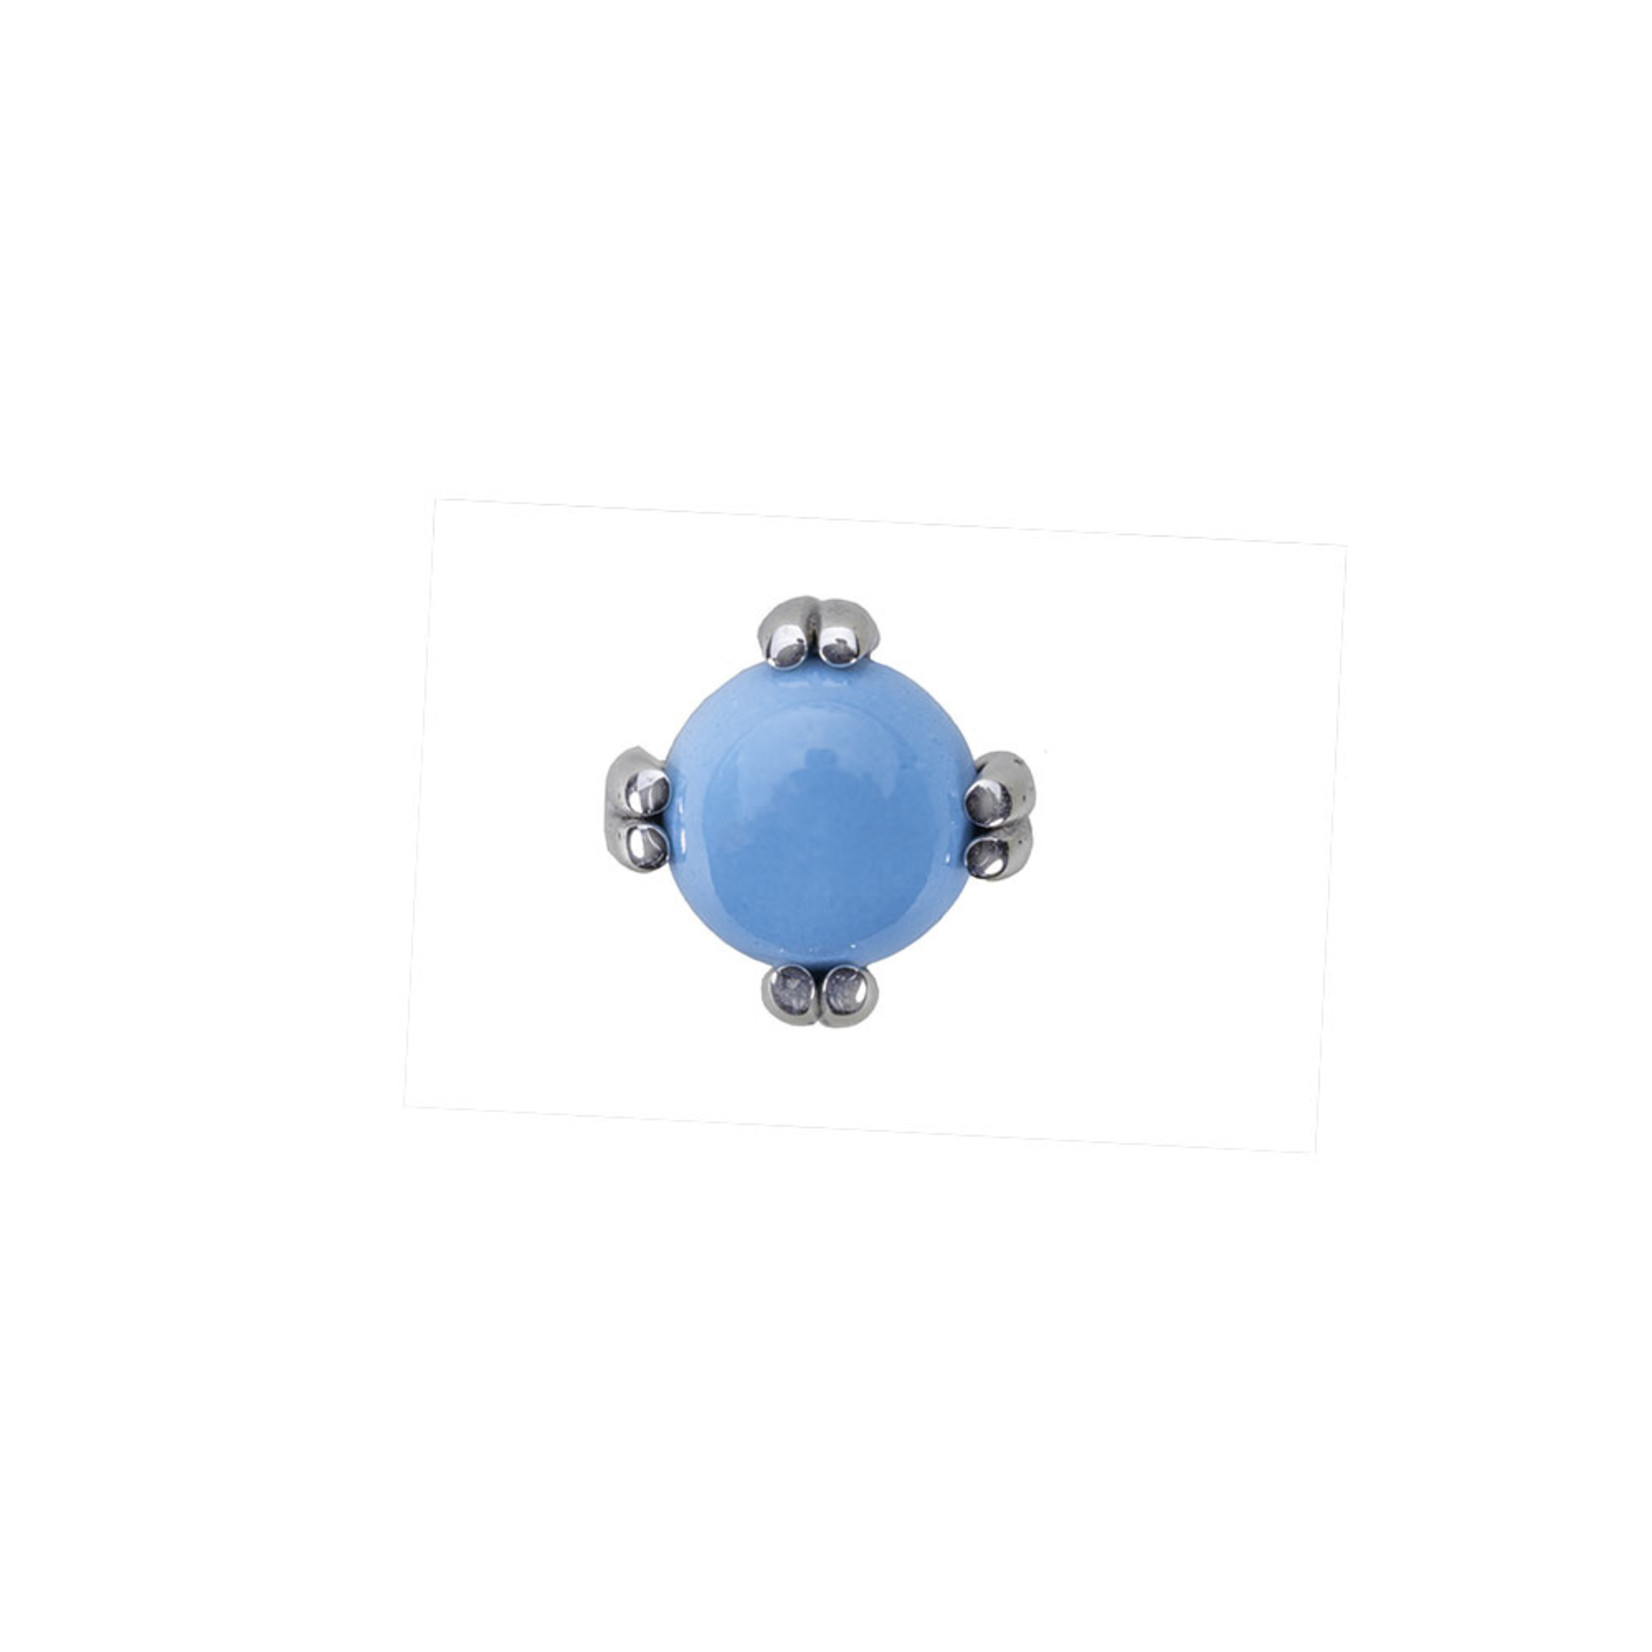 BVLA BVLA prong-set cabochon press-fit end with turquoise